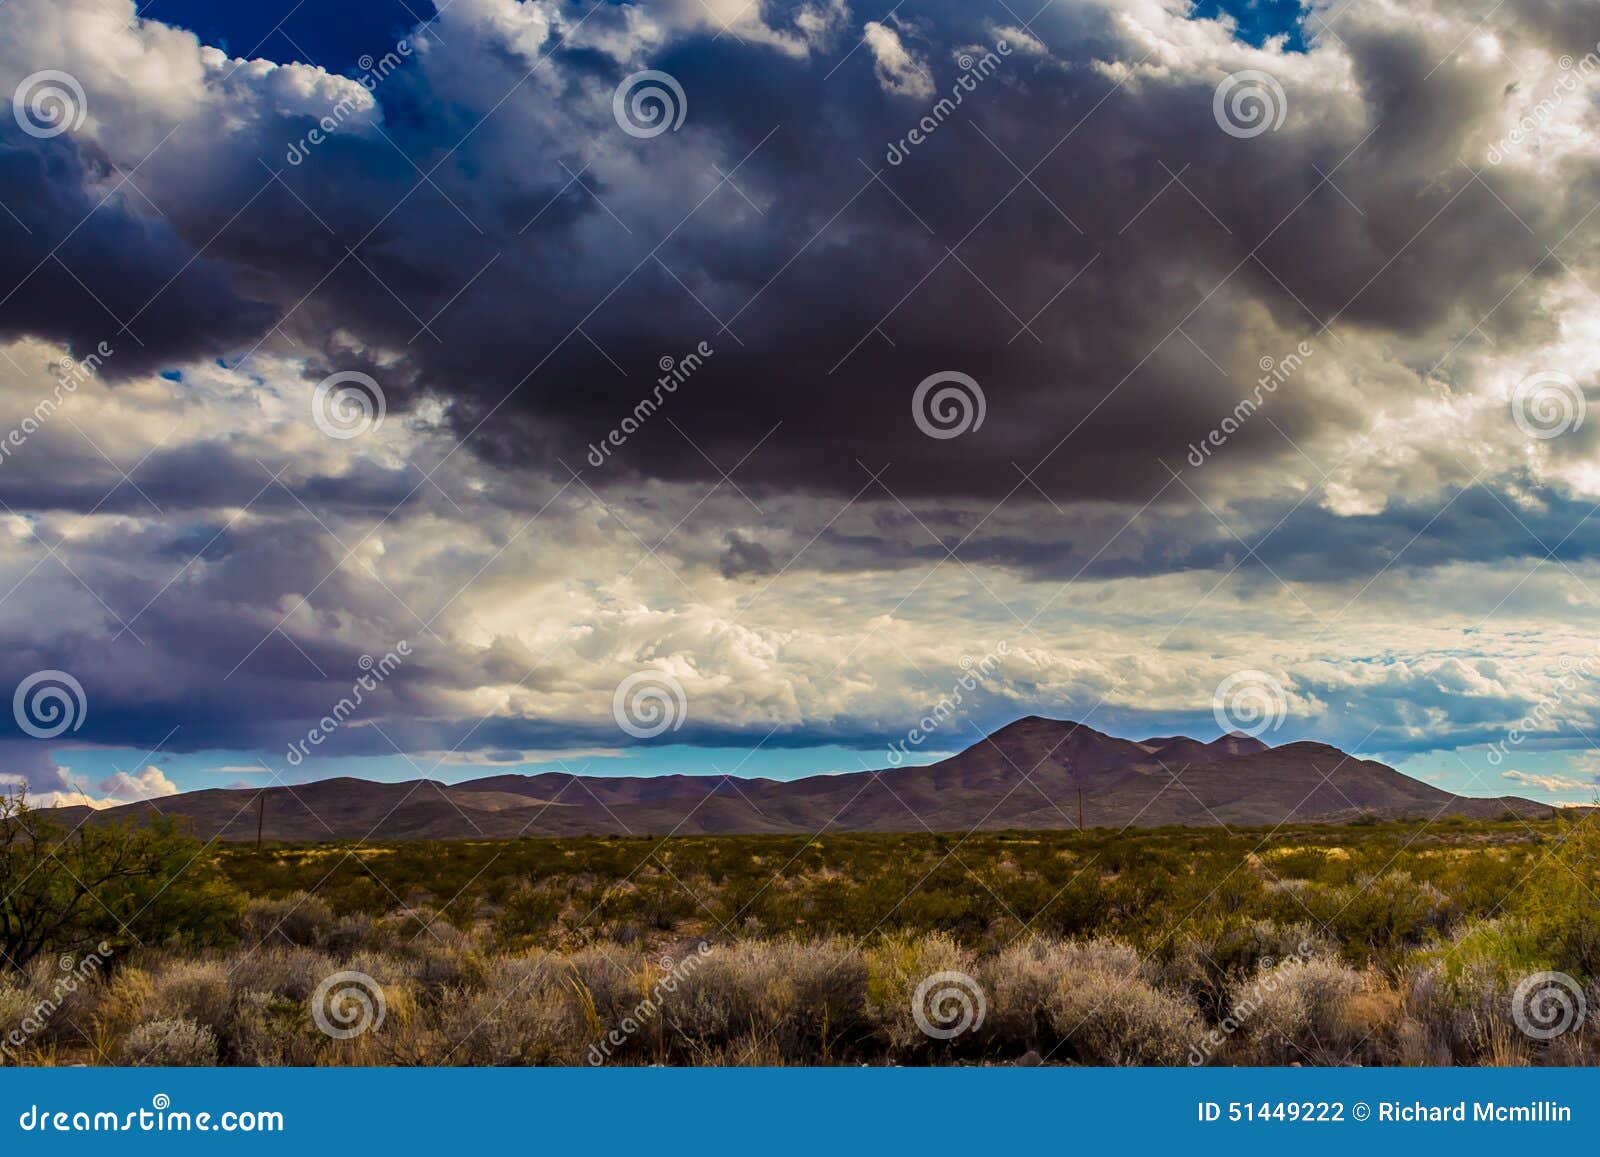 west texas landscape of desert area with hills.